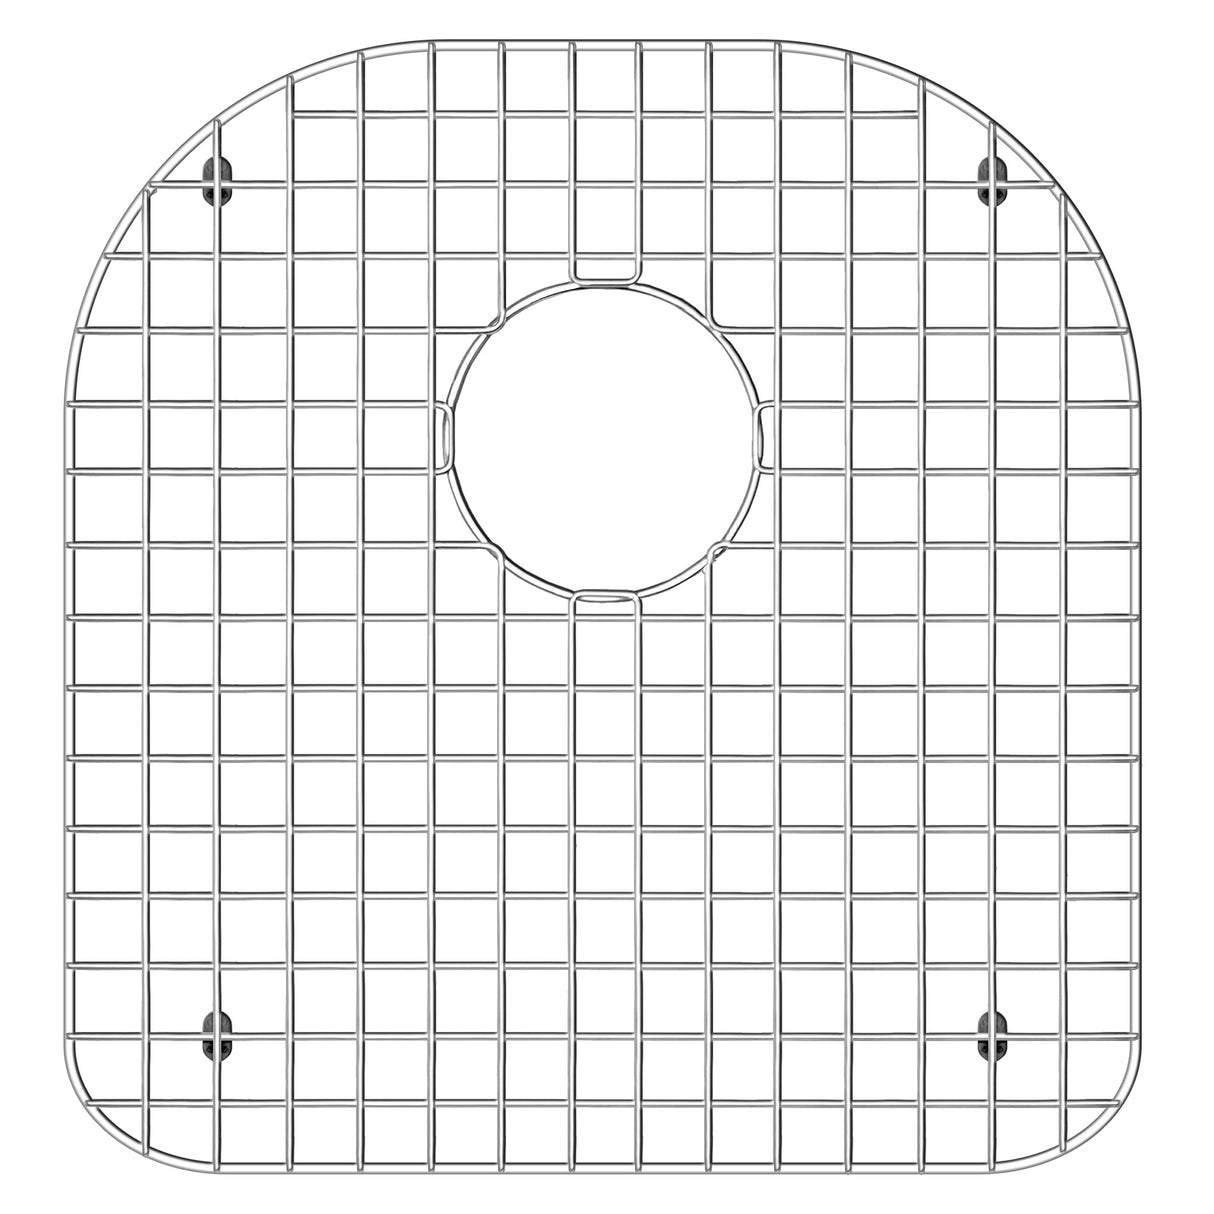 Stainless Steel Kitchen Sink Grid For Noah's Sink Model WHNAPD3322